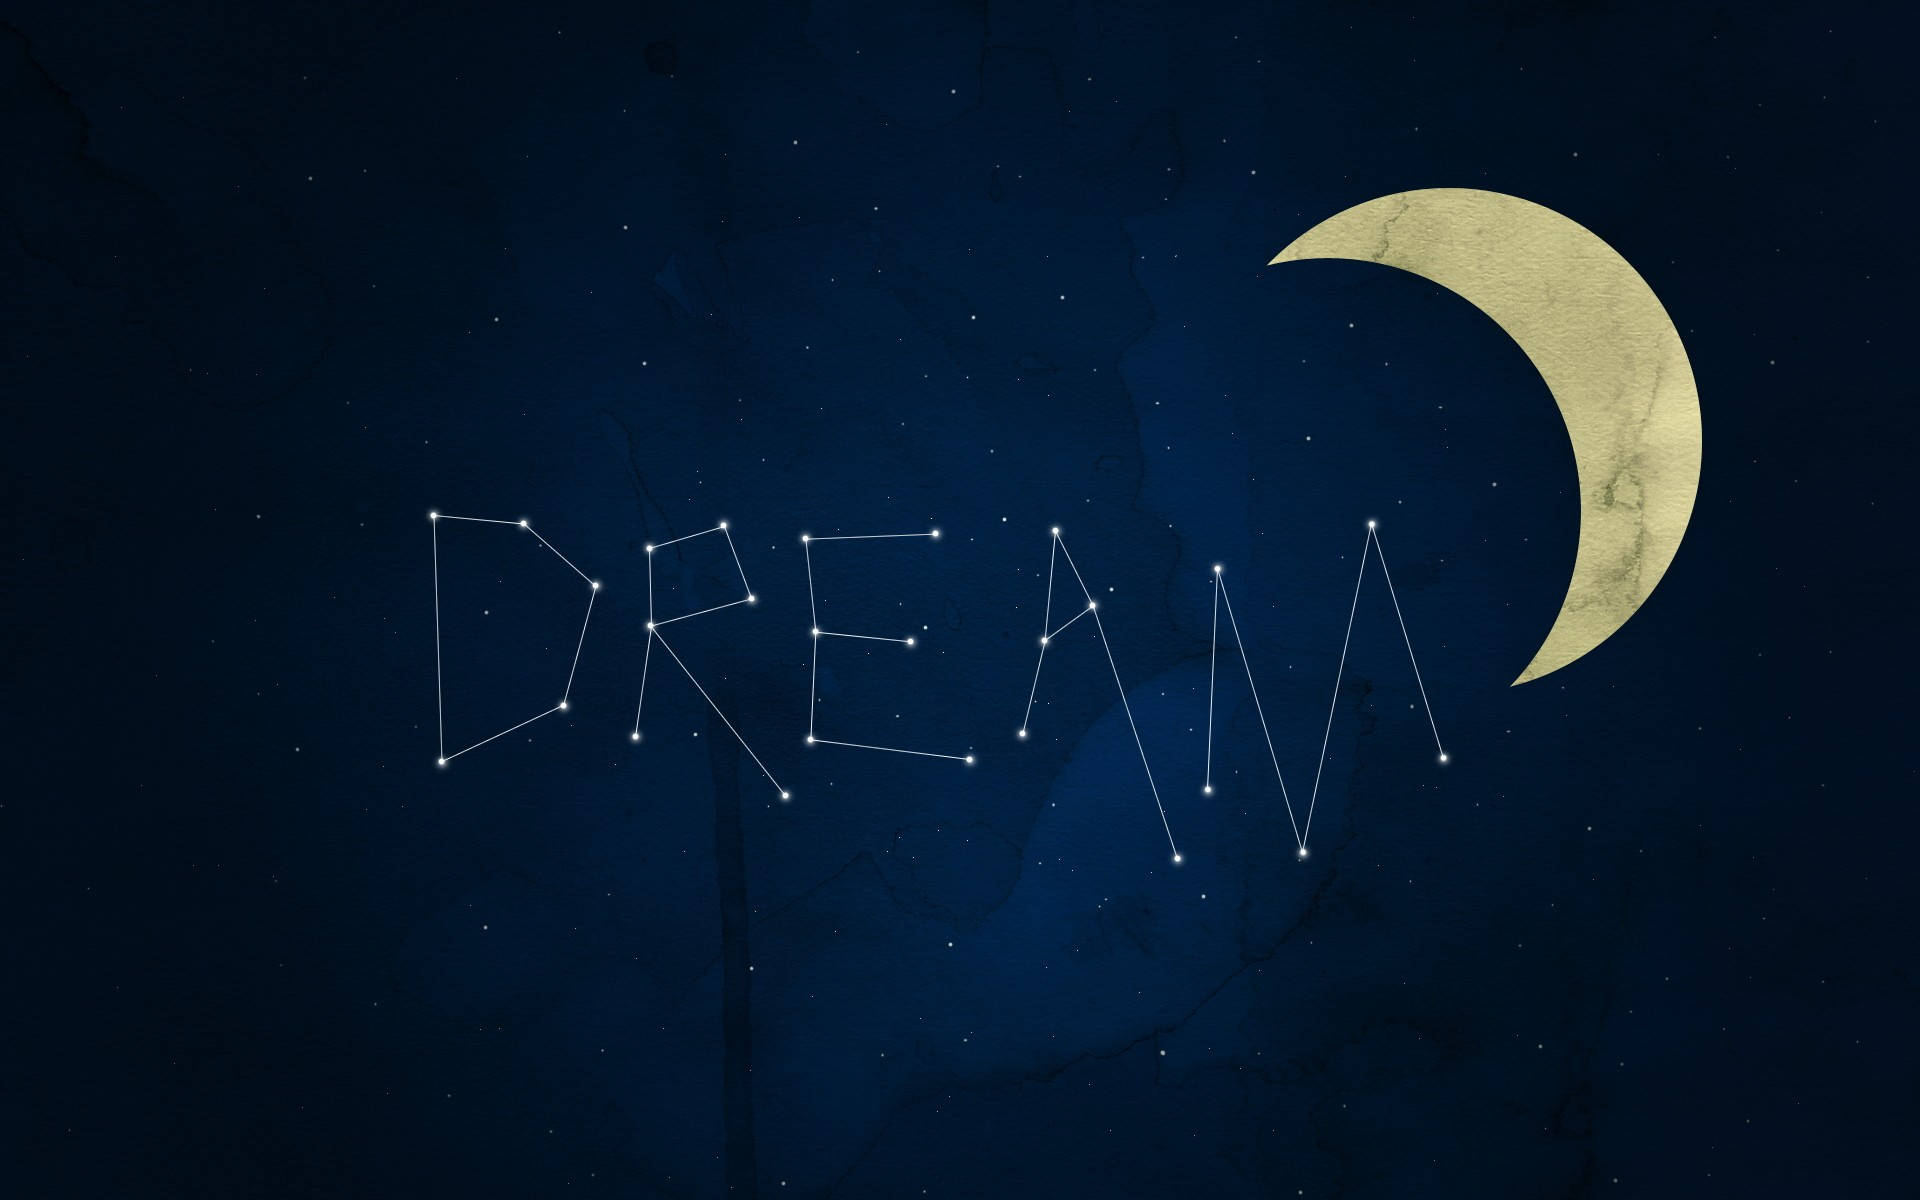 Free Dream Wallpaper Downloads, [200+] Dream Wallpapers for FREE |  